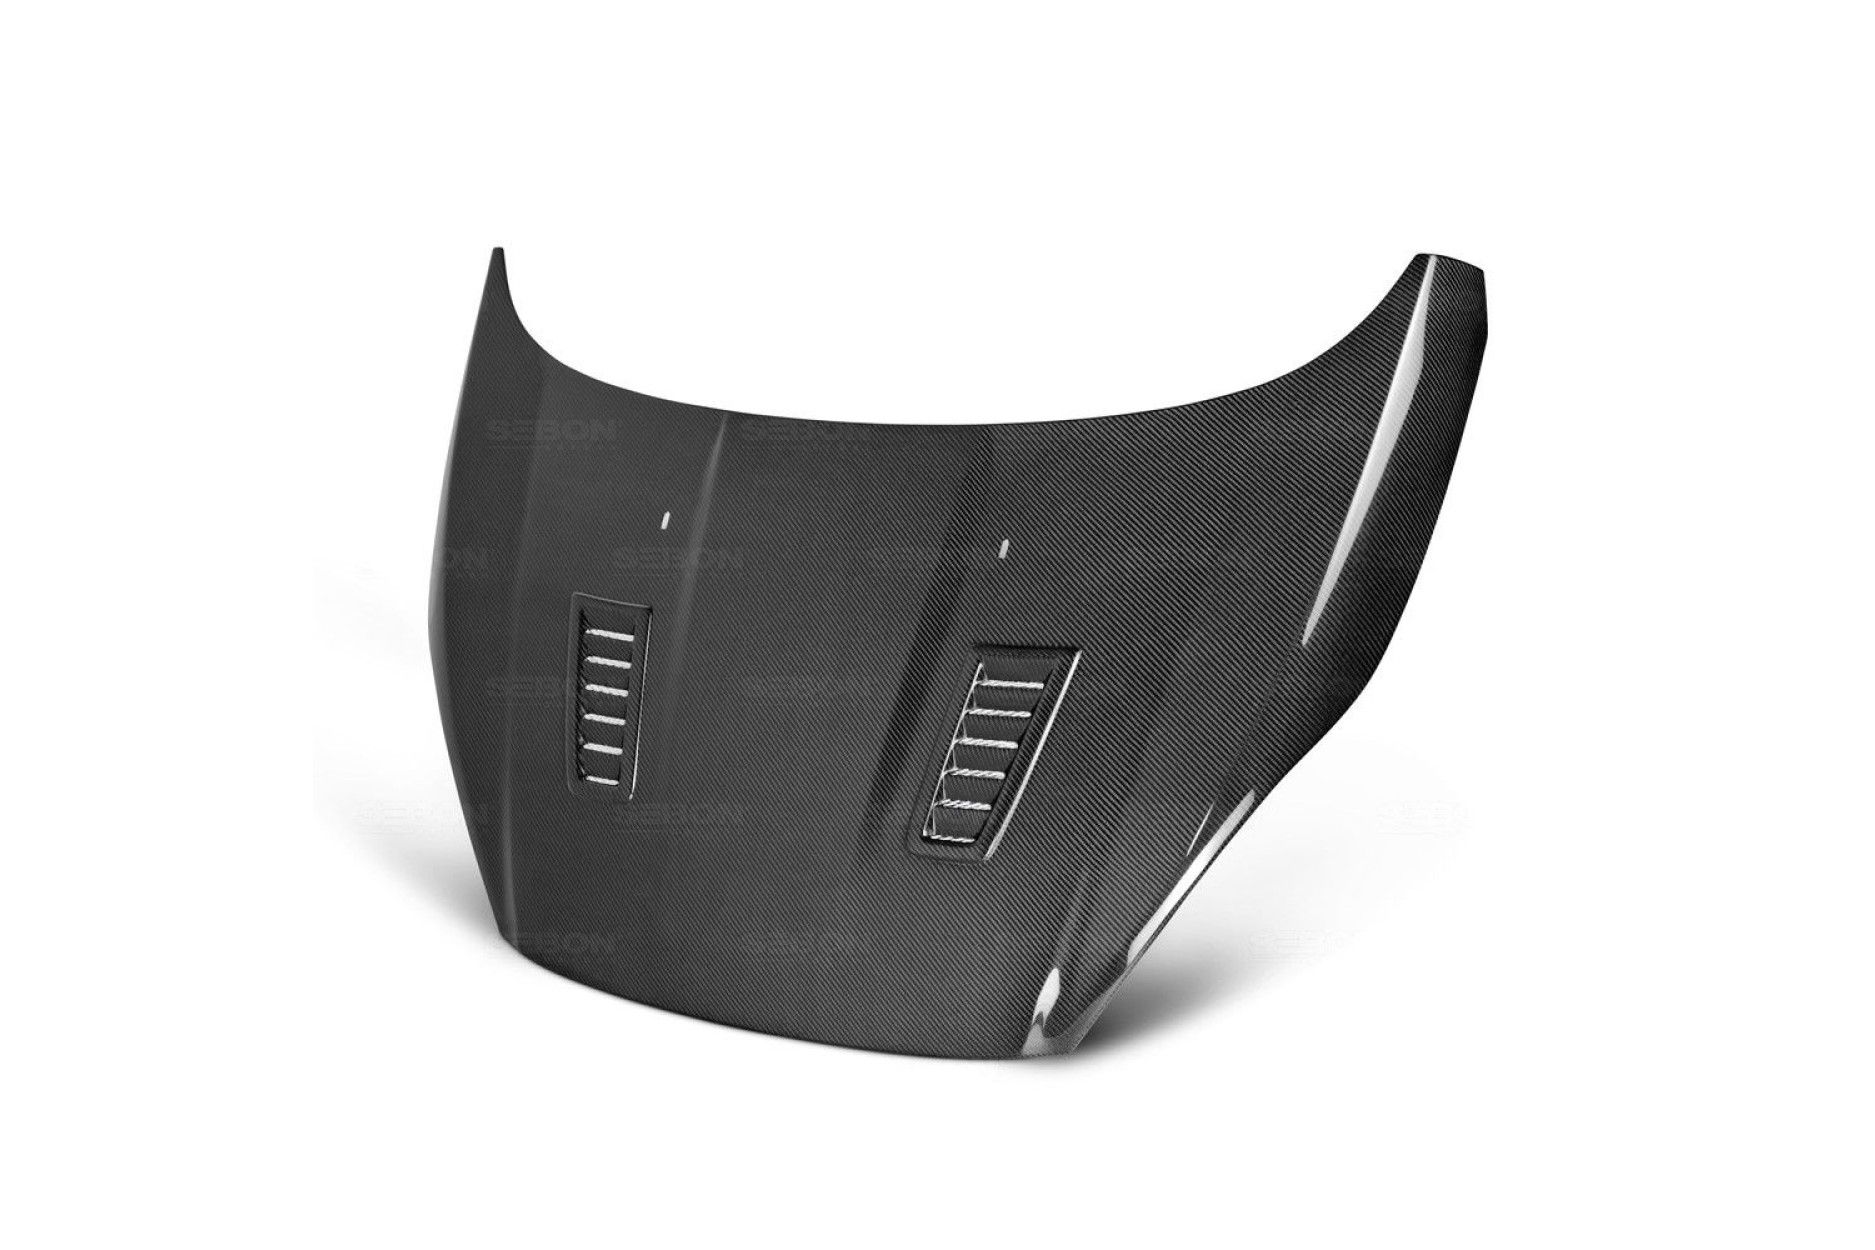 Seibon carbon hood fitting forD Fiesta 2014-2017 RS-Style